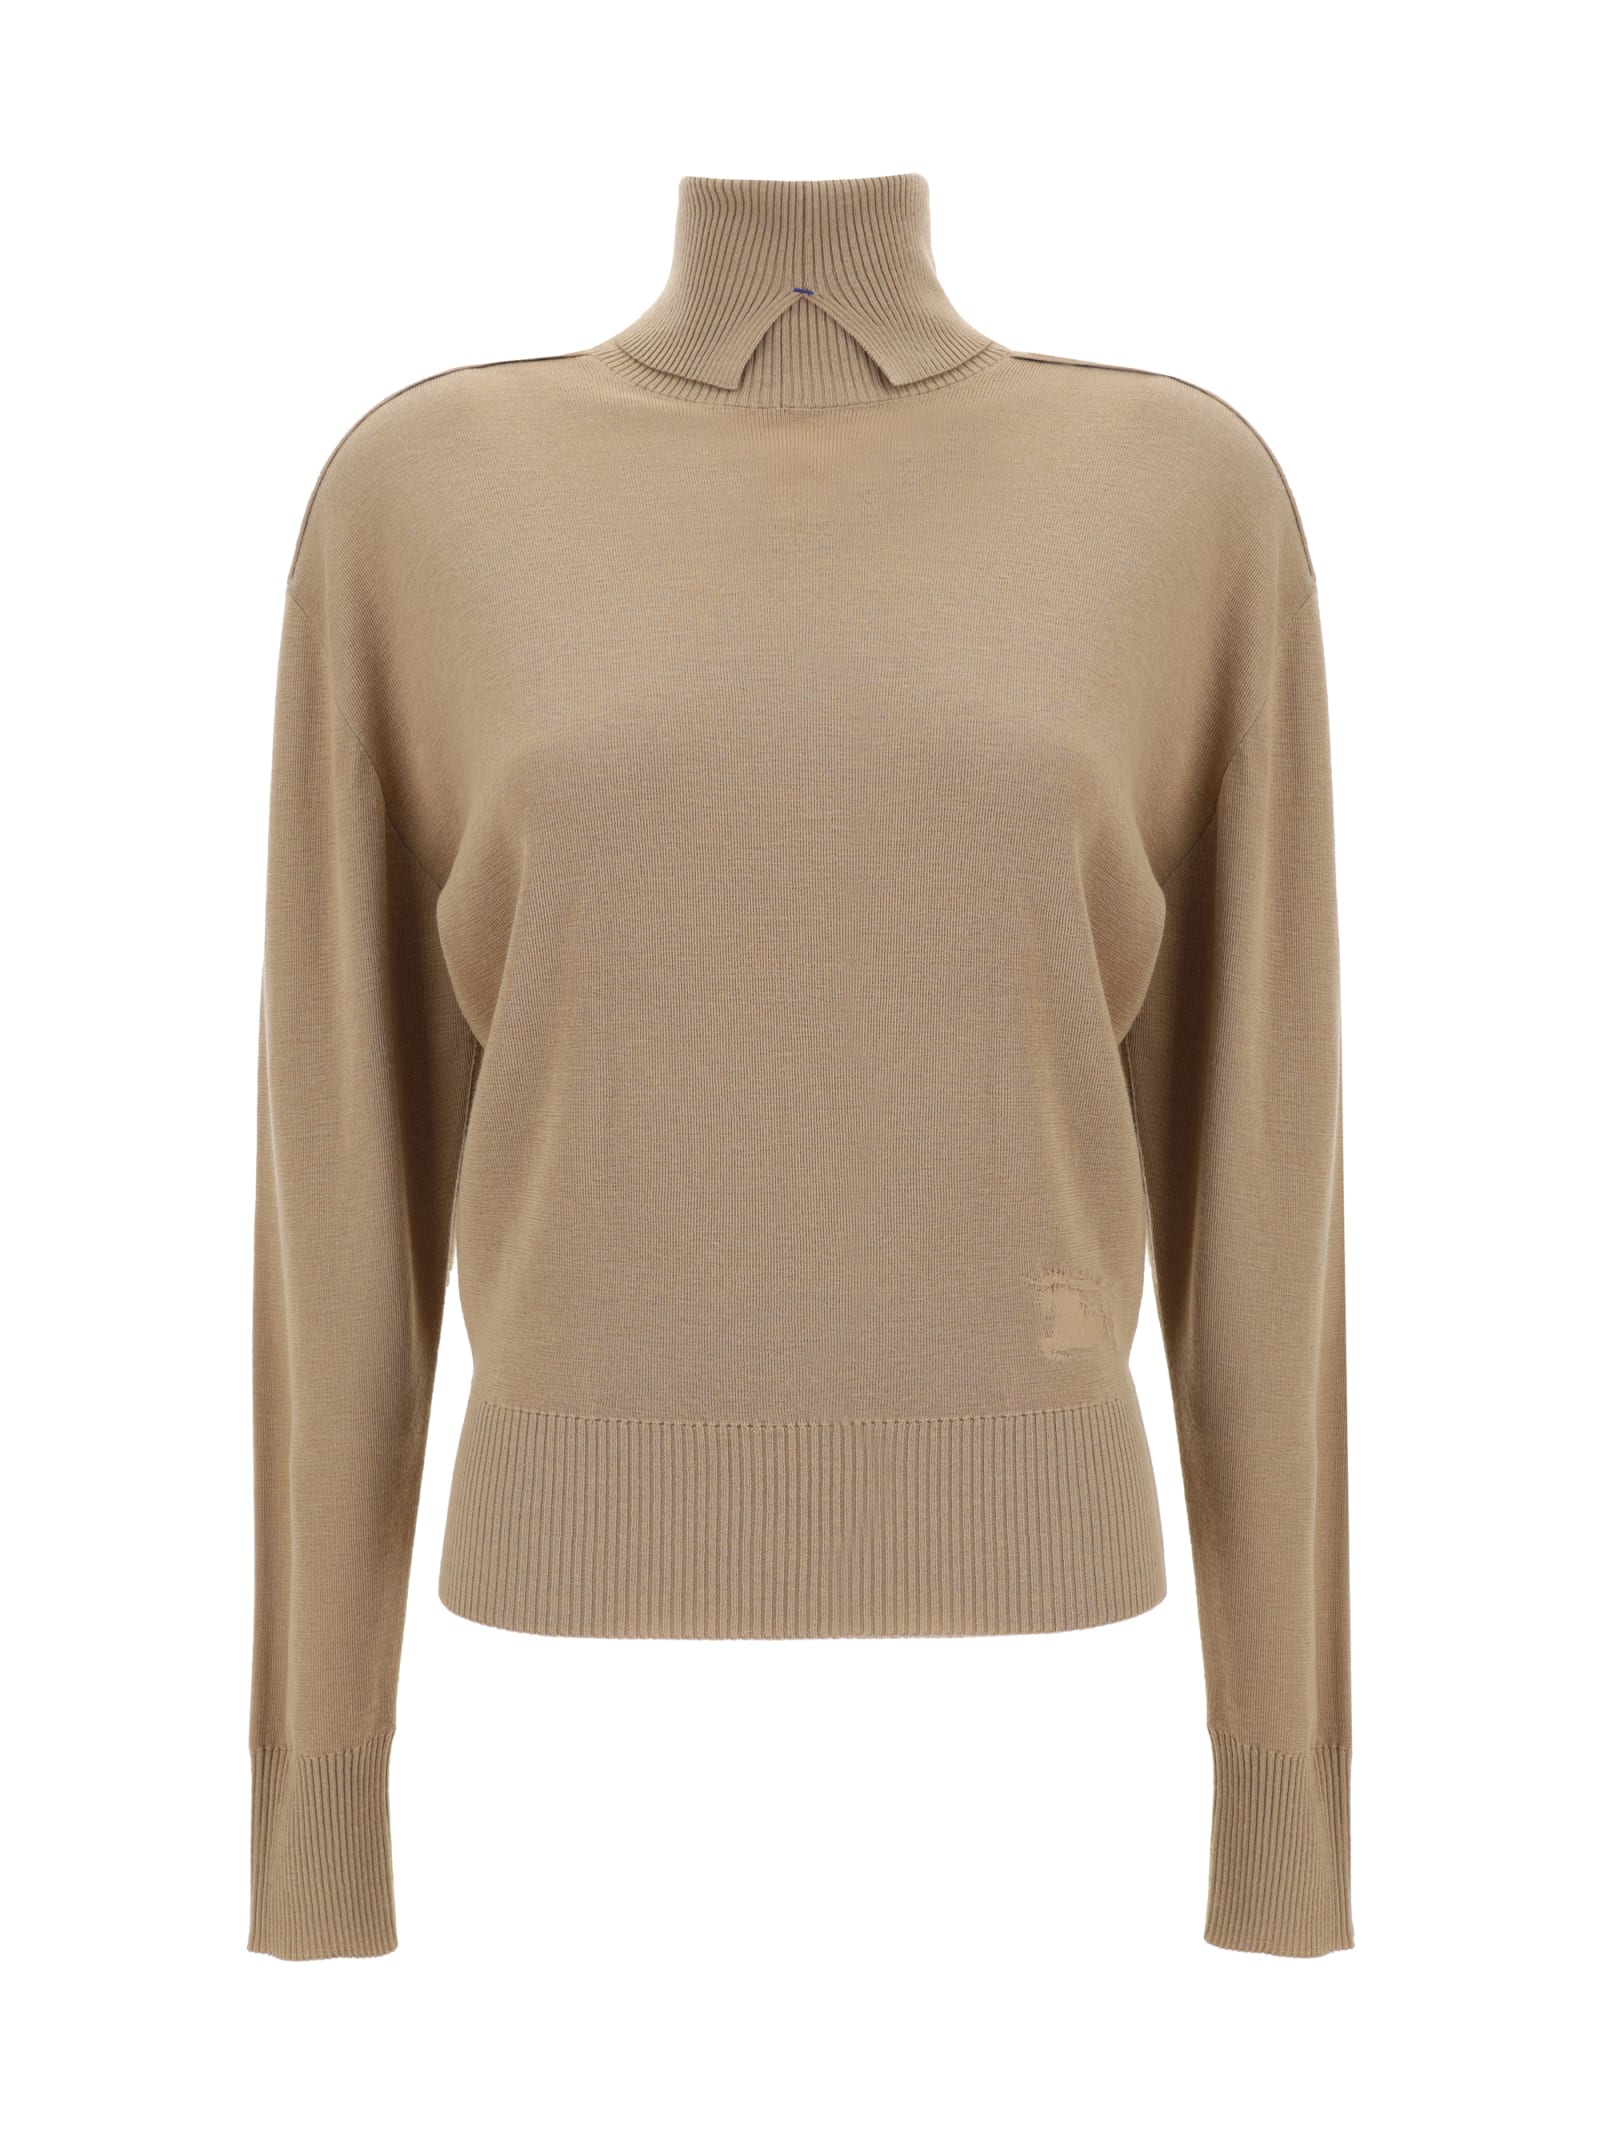 Burberry Turtleneck Sweater In Flax